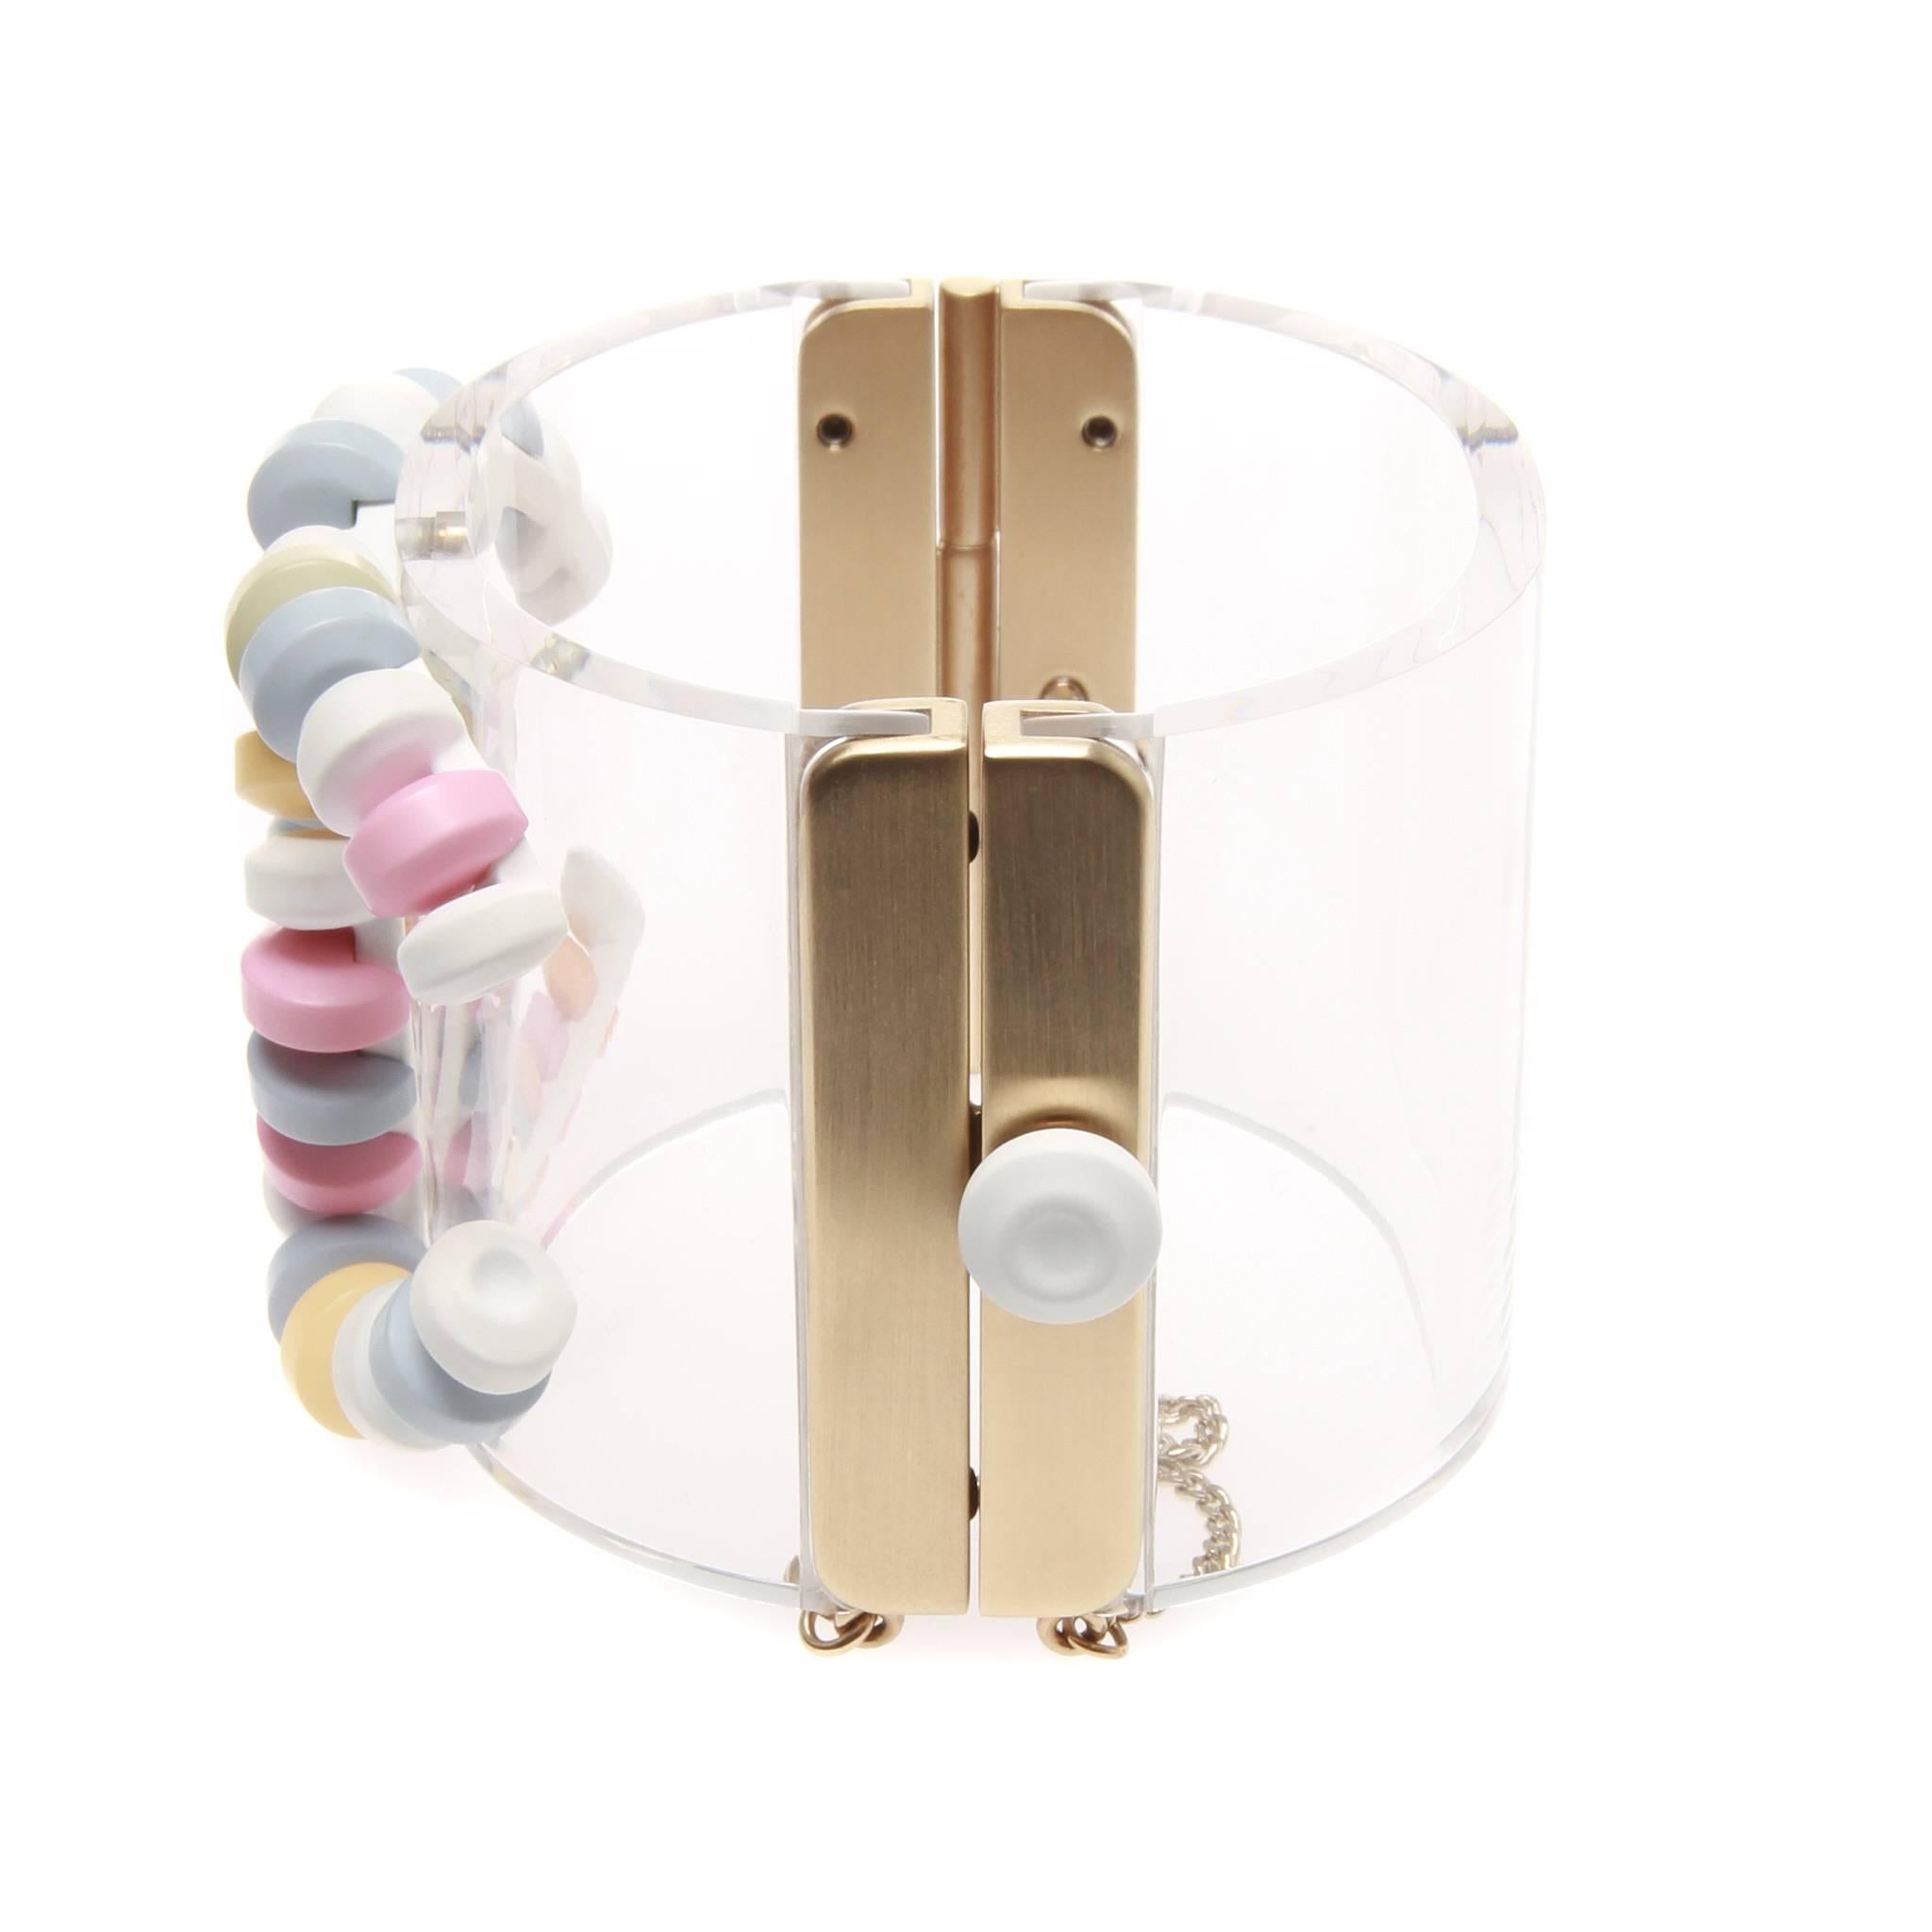 Sweet Candy Signature CC Cuff Multi Colour Lucite Clear Bracelet
Fun and vibrant piece of jewellery.
Can be casual or formal.
Exterior condition: Excellent condition very minimal signs of wear on the hardware (a few speckles of